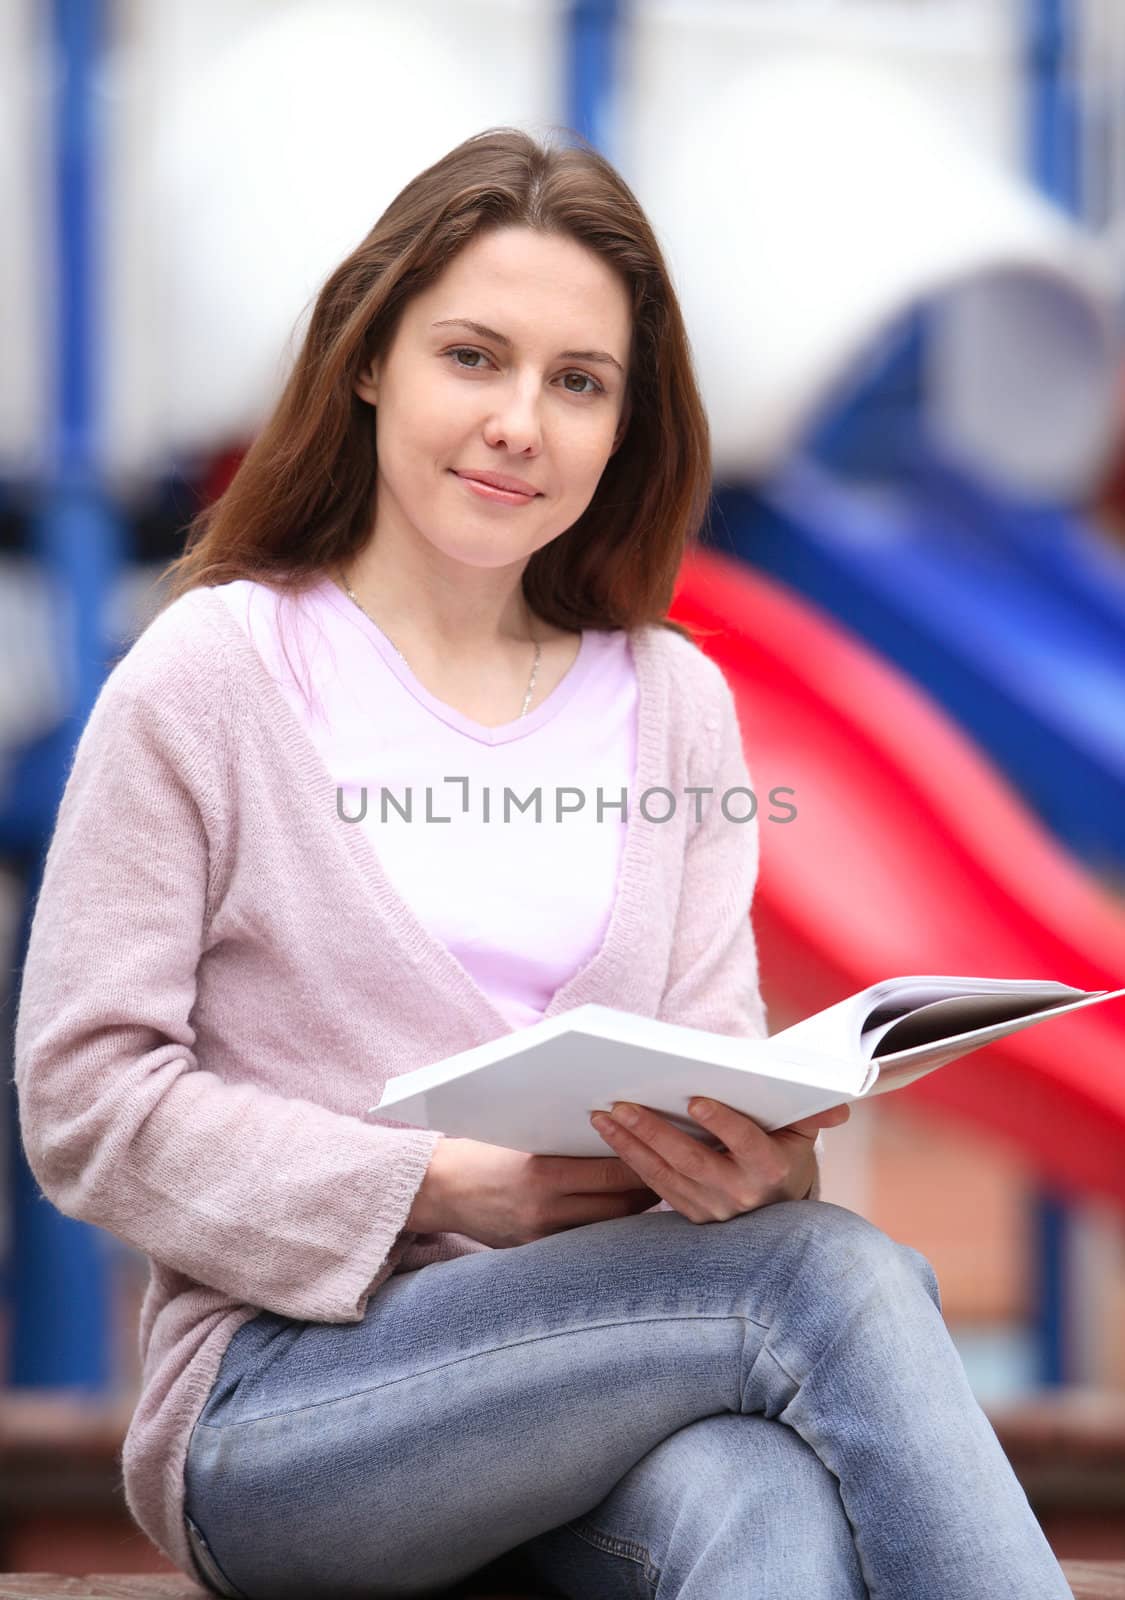 The girl sits on a bench with the book